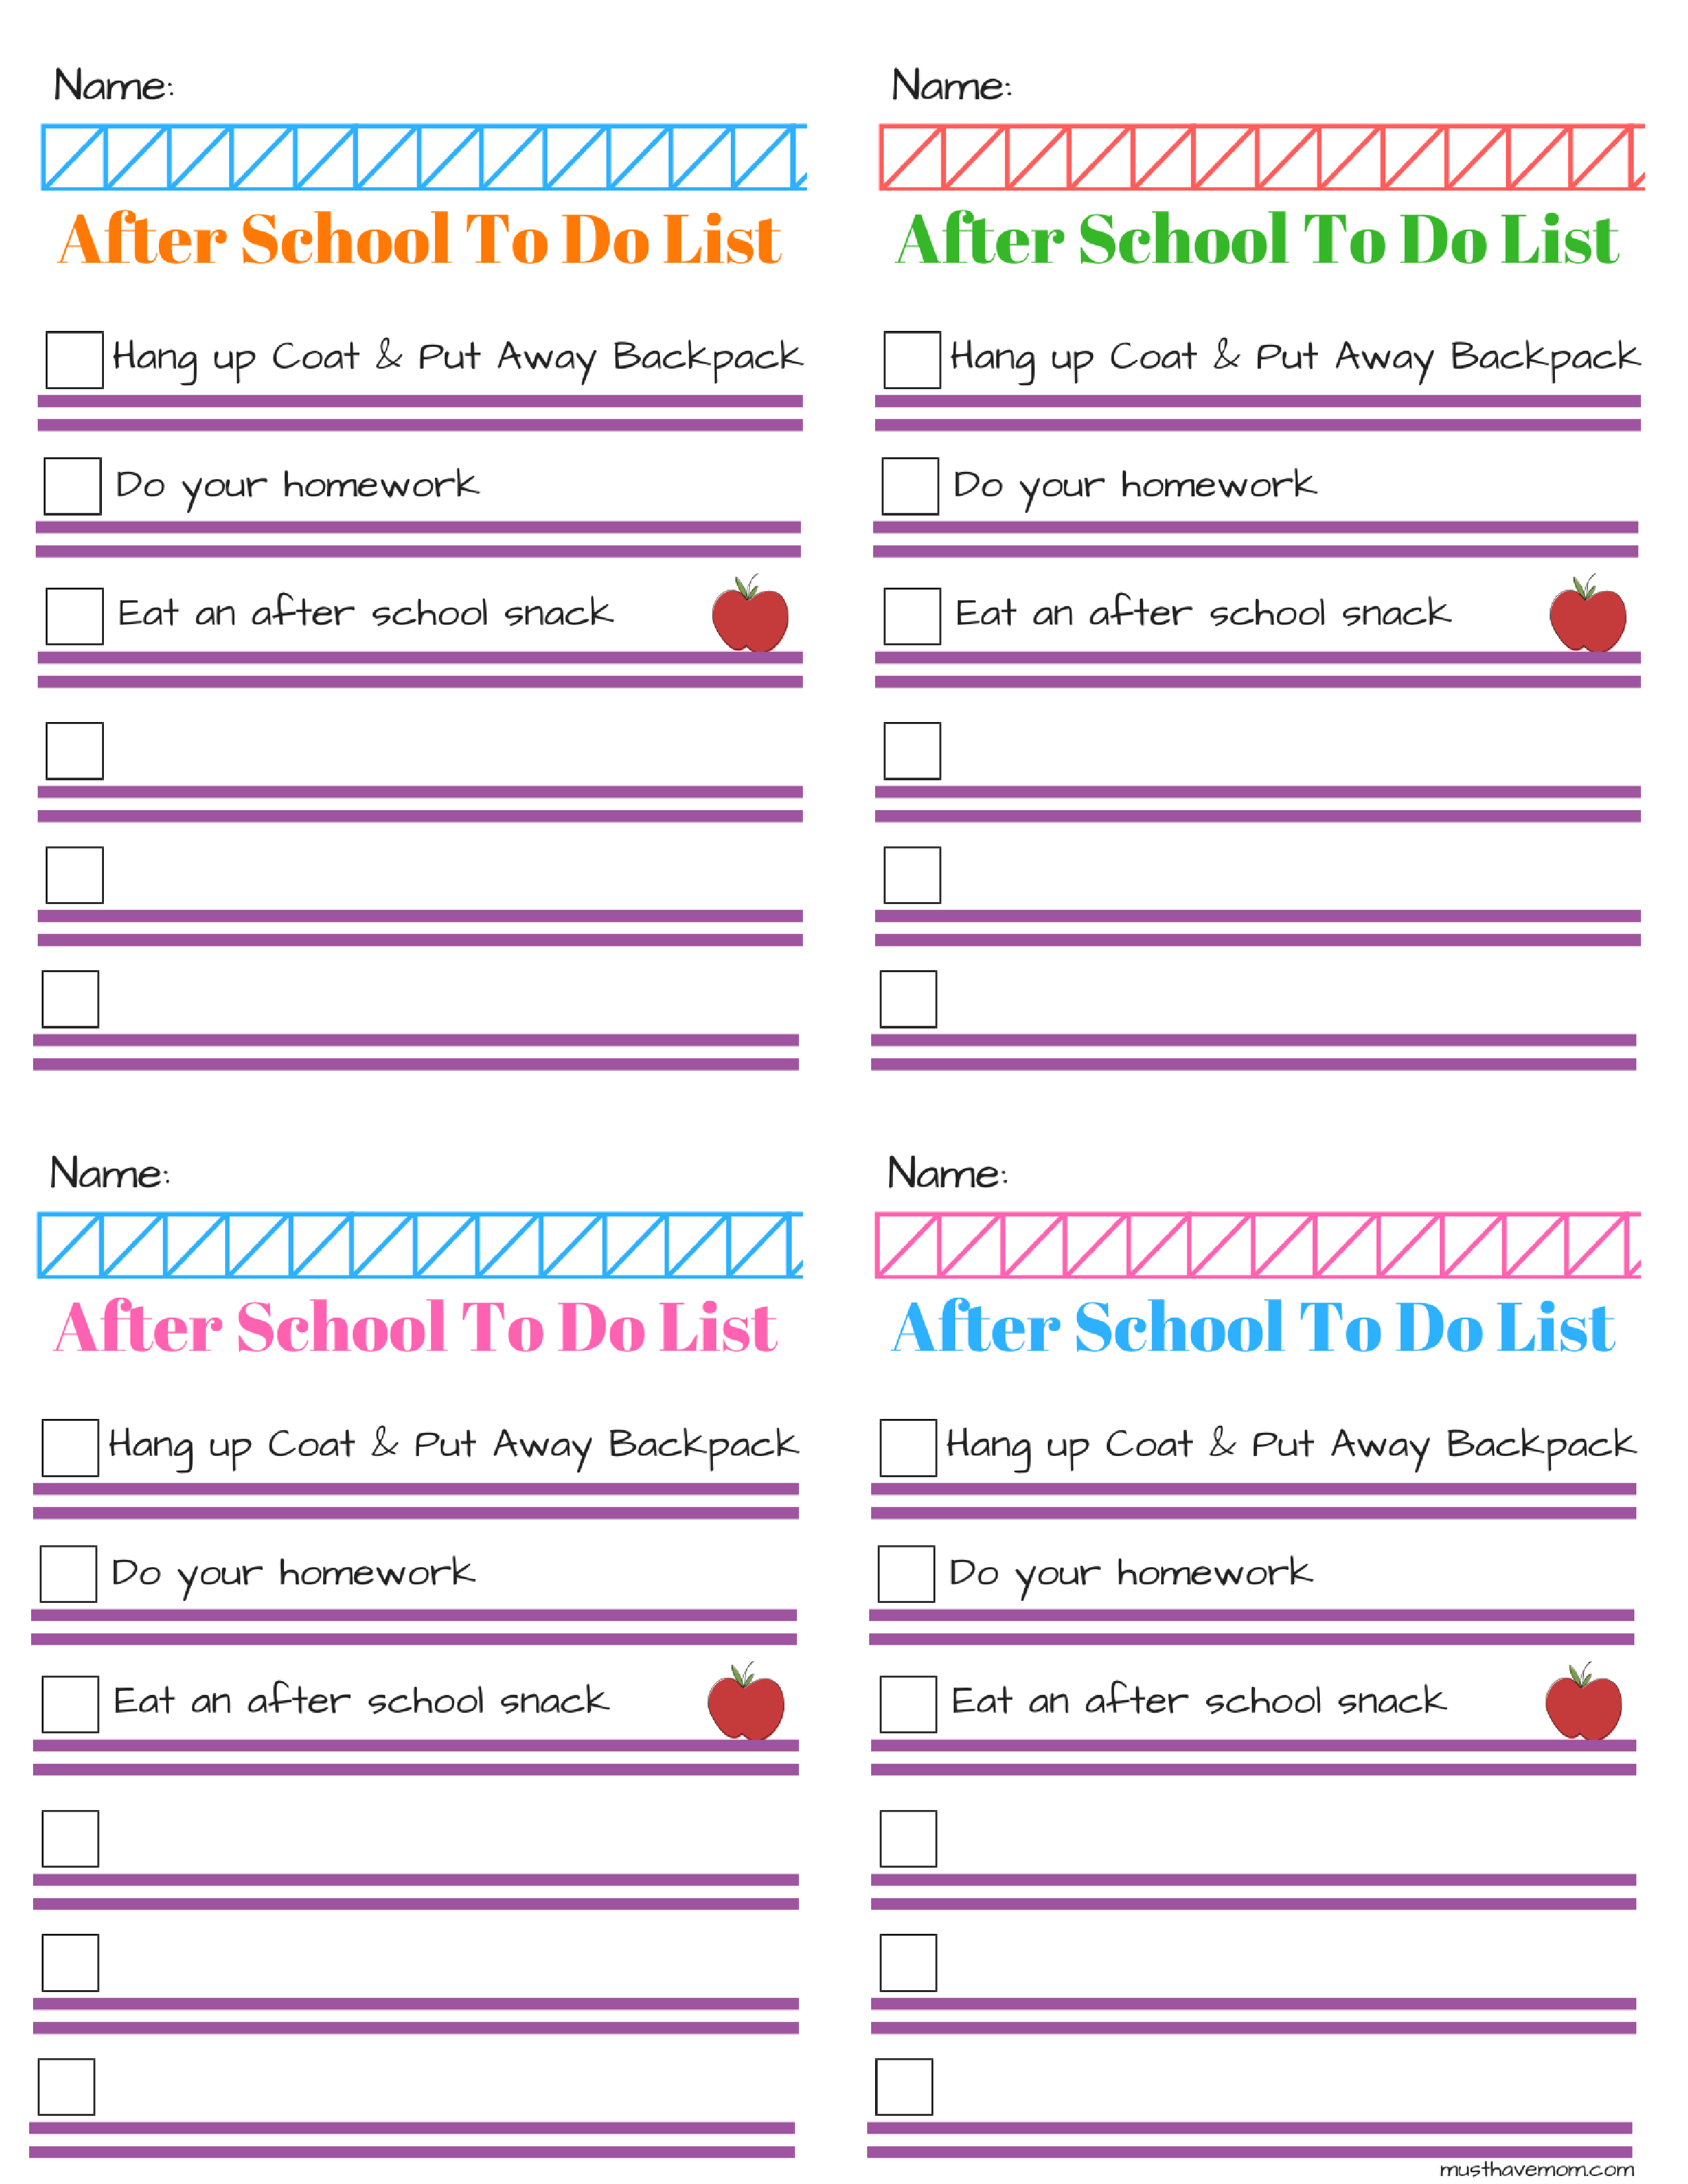 Free Printable Chore List For Kids! | Must Have Mom Printables - Free Printable Kids To Do List